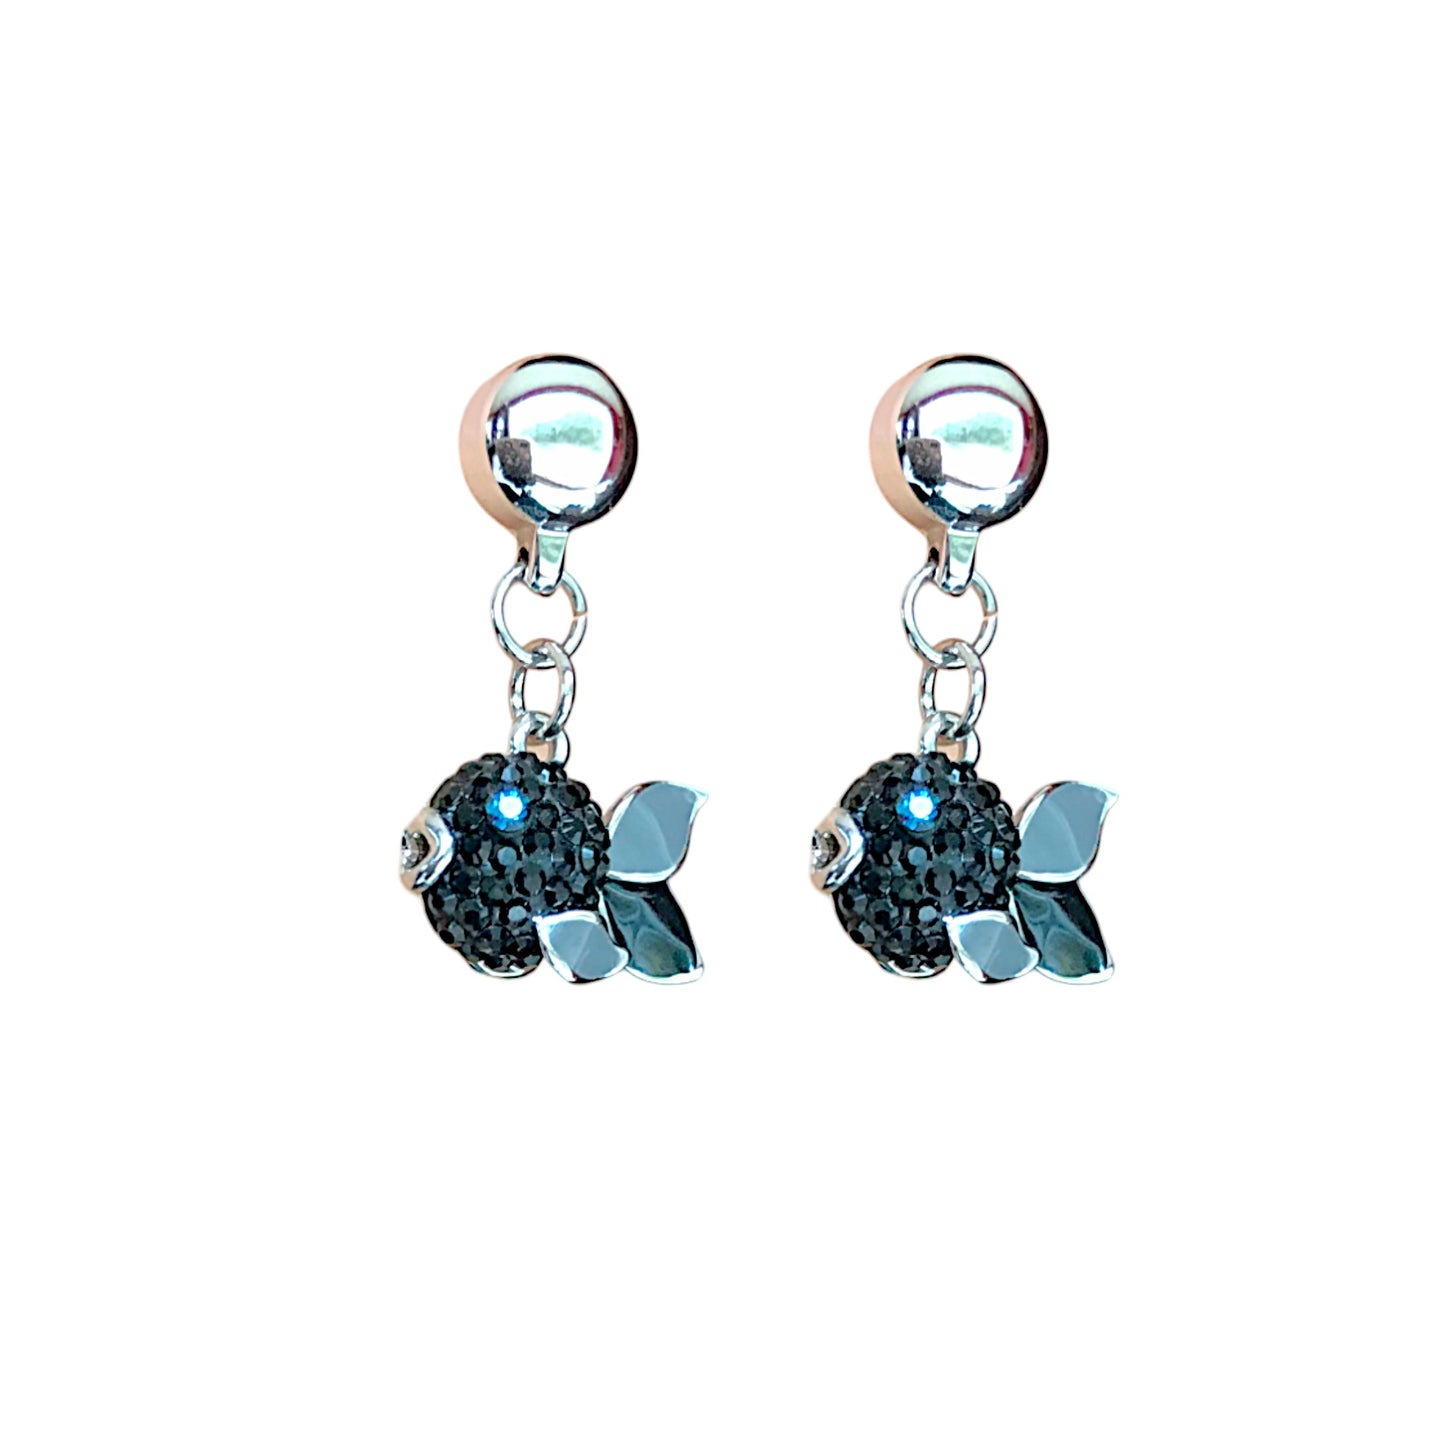 TI-GO Fish Charm earrings. Magnetic titanium interchangeable earring system. Detachable earrings for a truly hypoallergenic jewellery on a white background. black grey